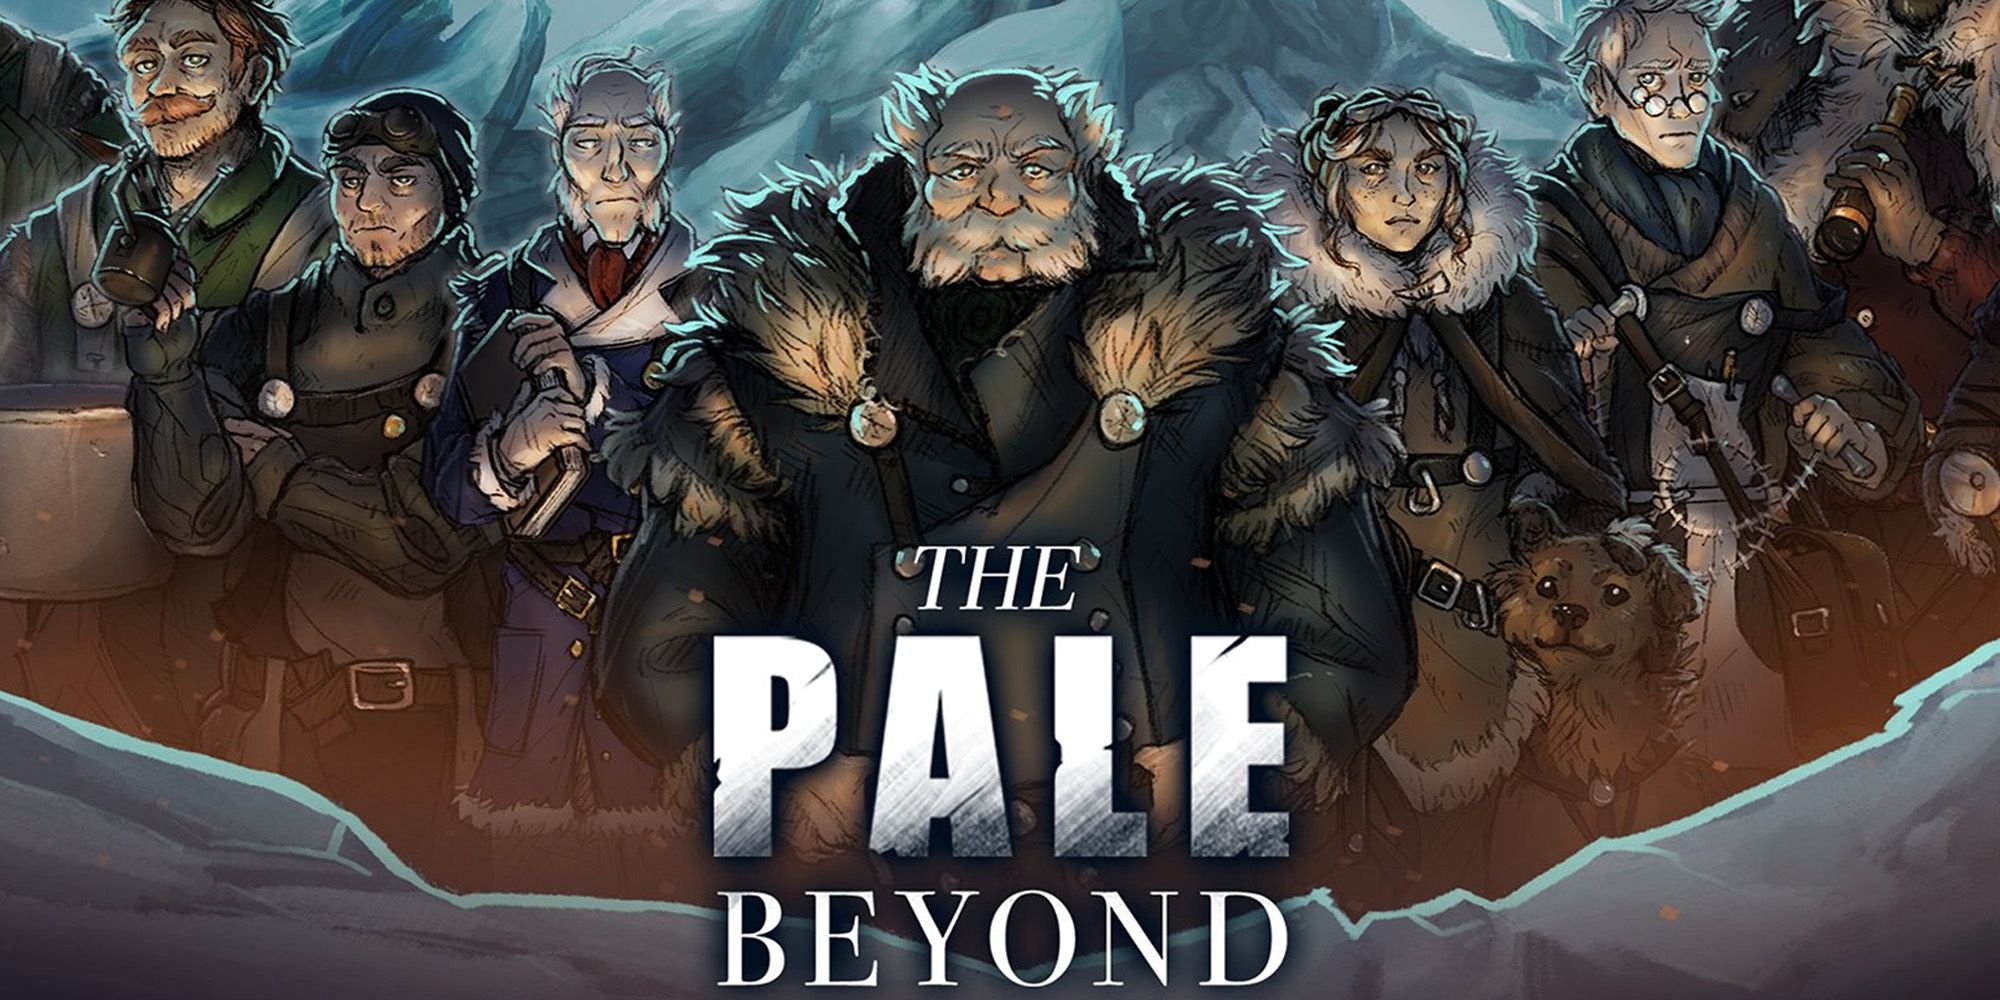 Image of a ship's crew in heavy layers of clothes with the logo for The Pale Beyond at the center.